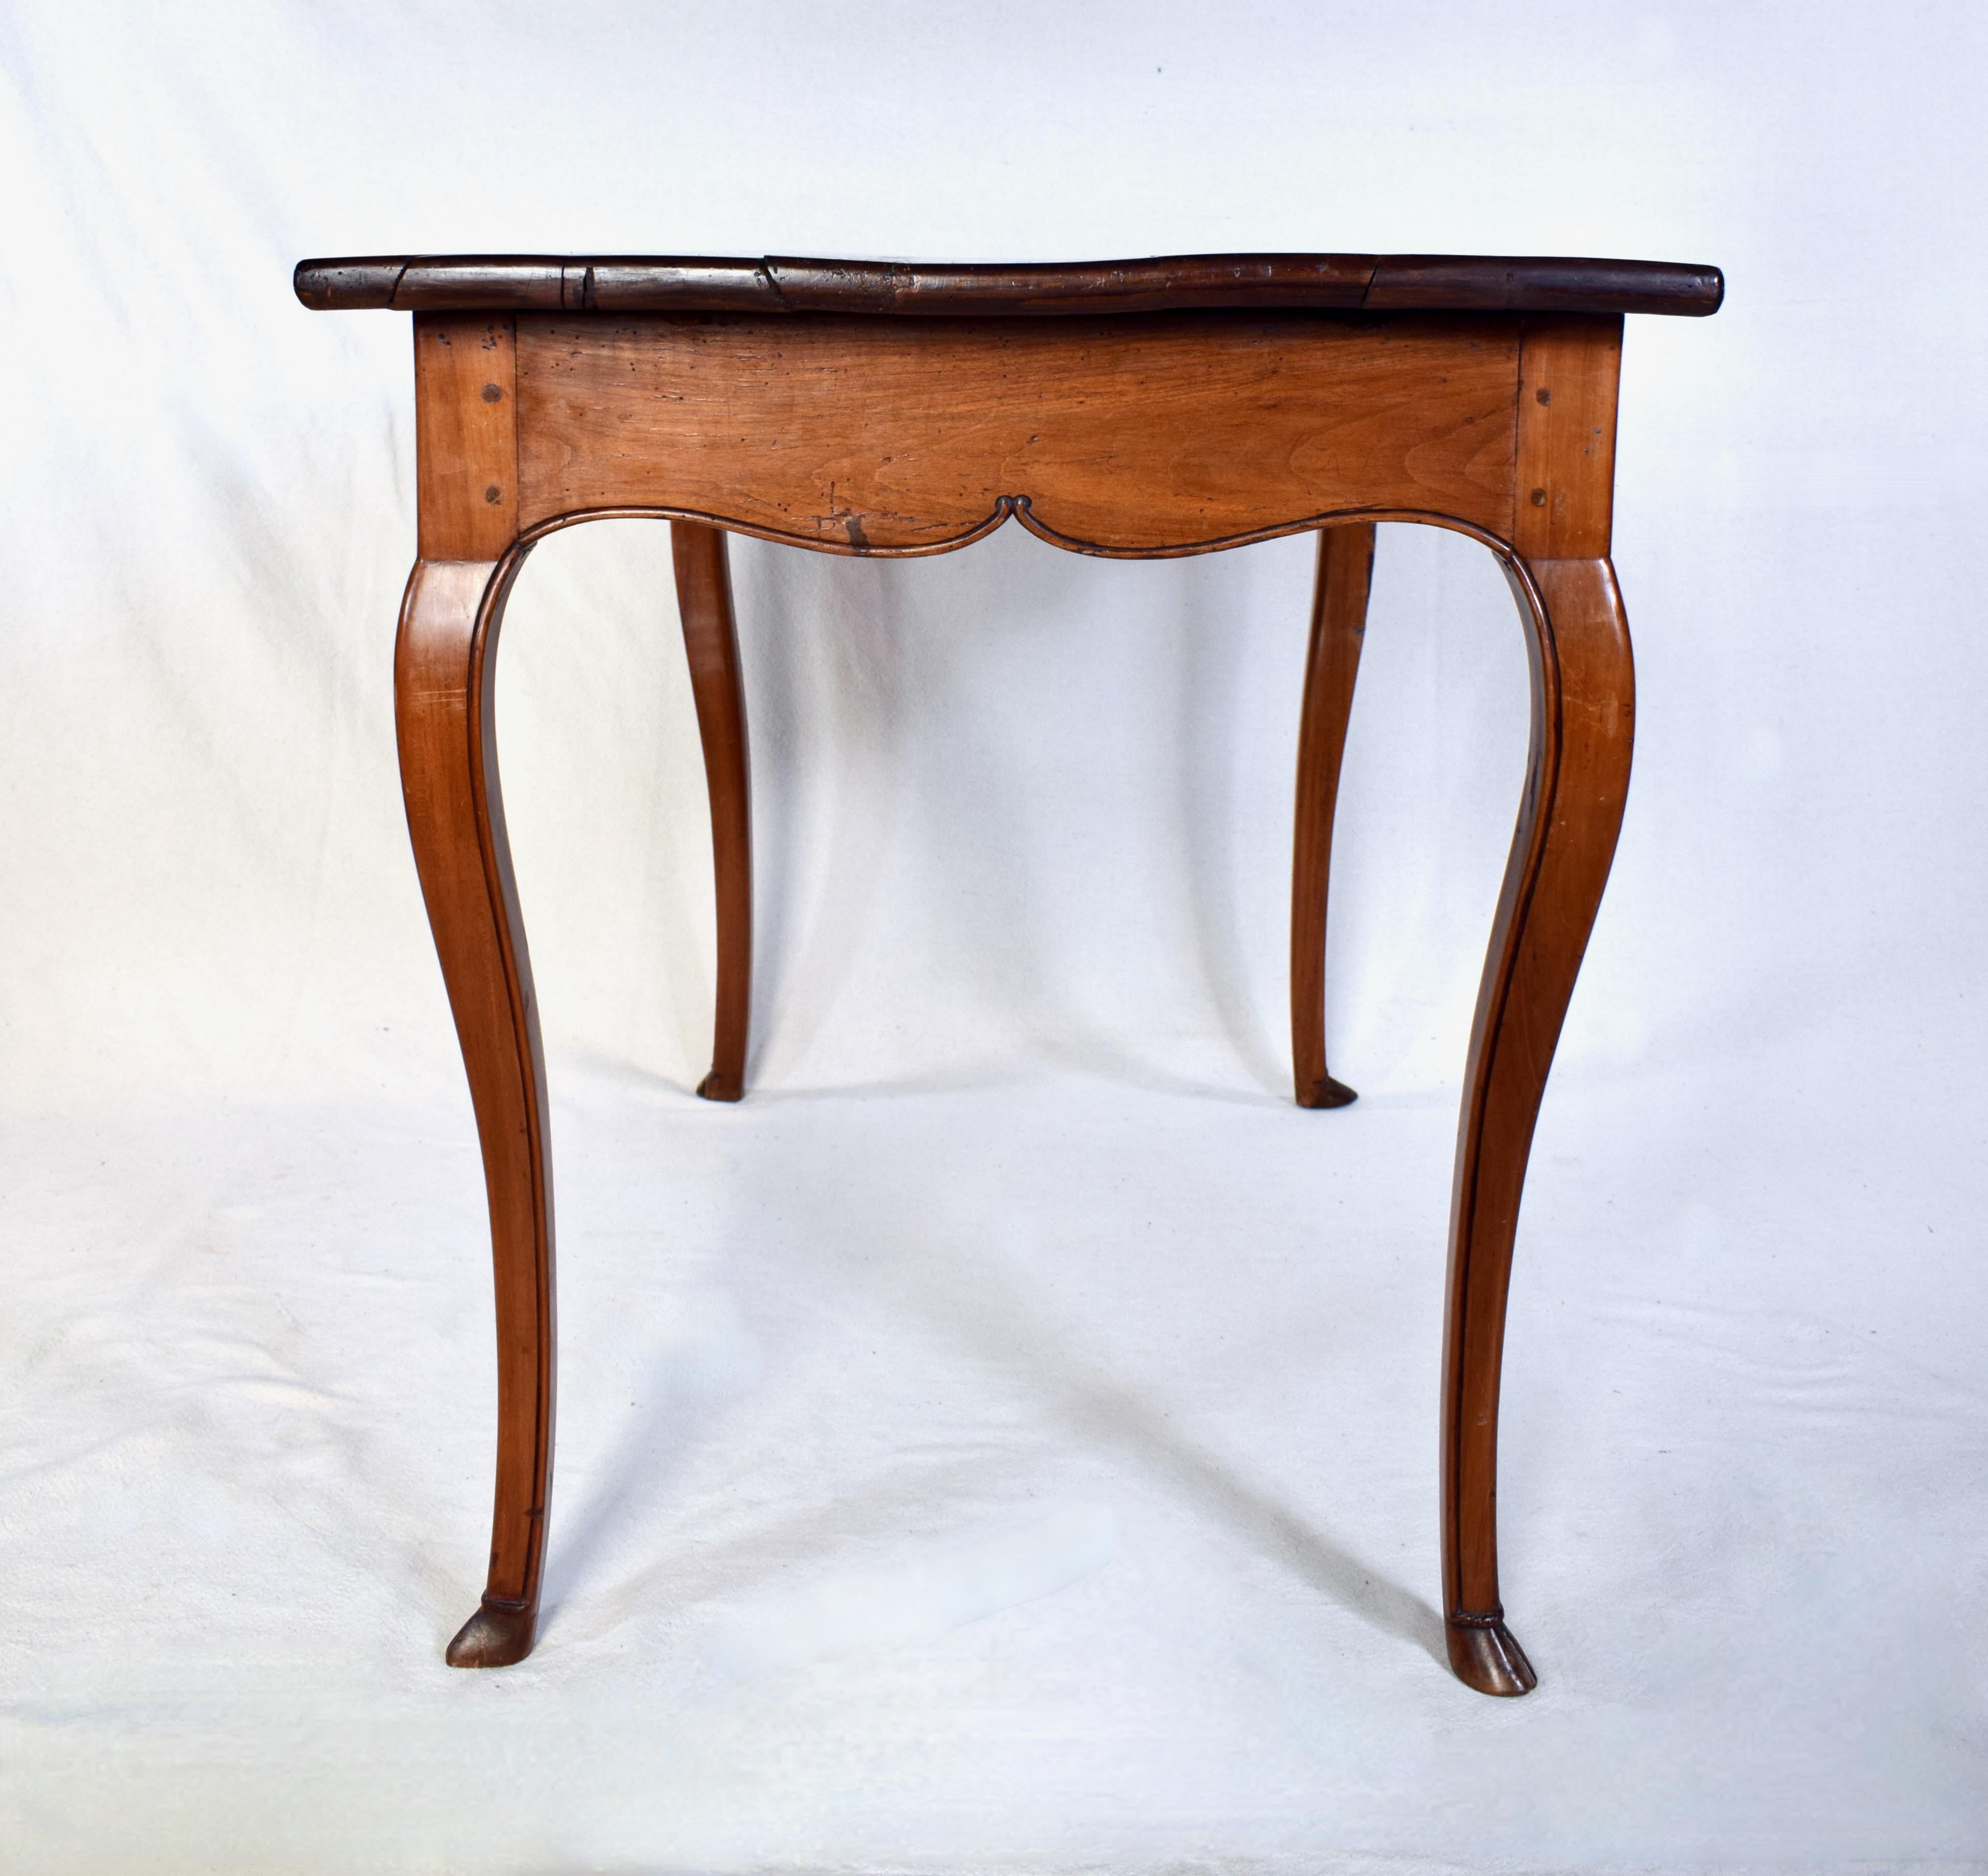 French Mid-18th Century Louis XV Period Petit Desk or Side Table For Sale 4